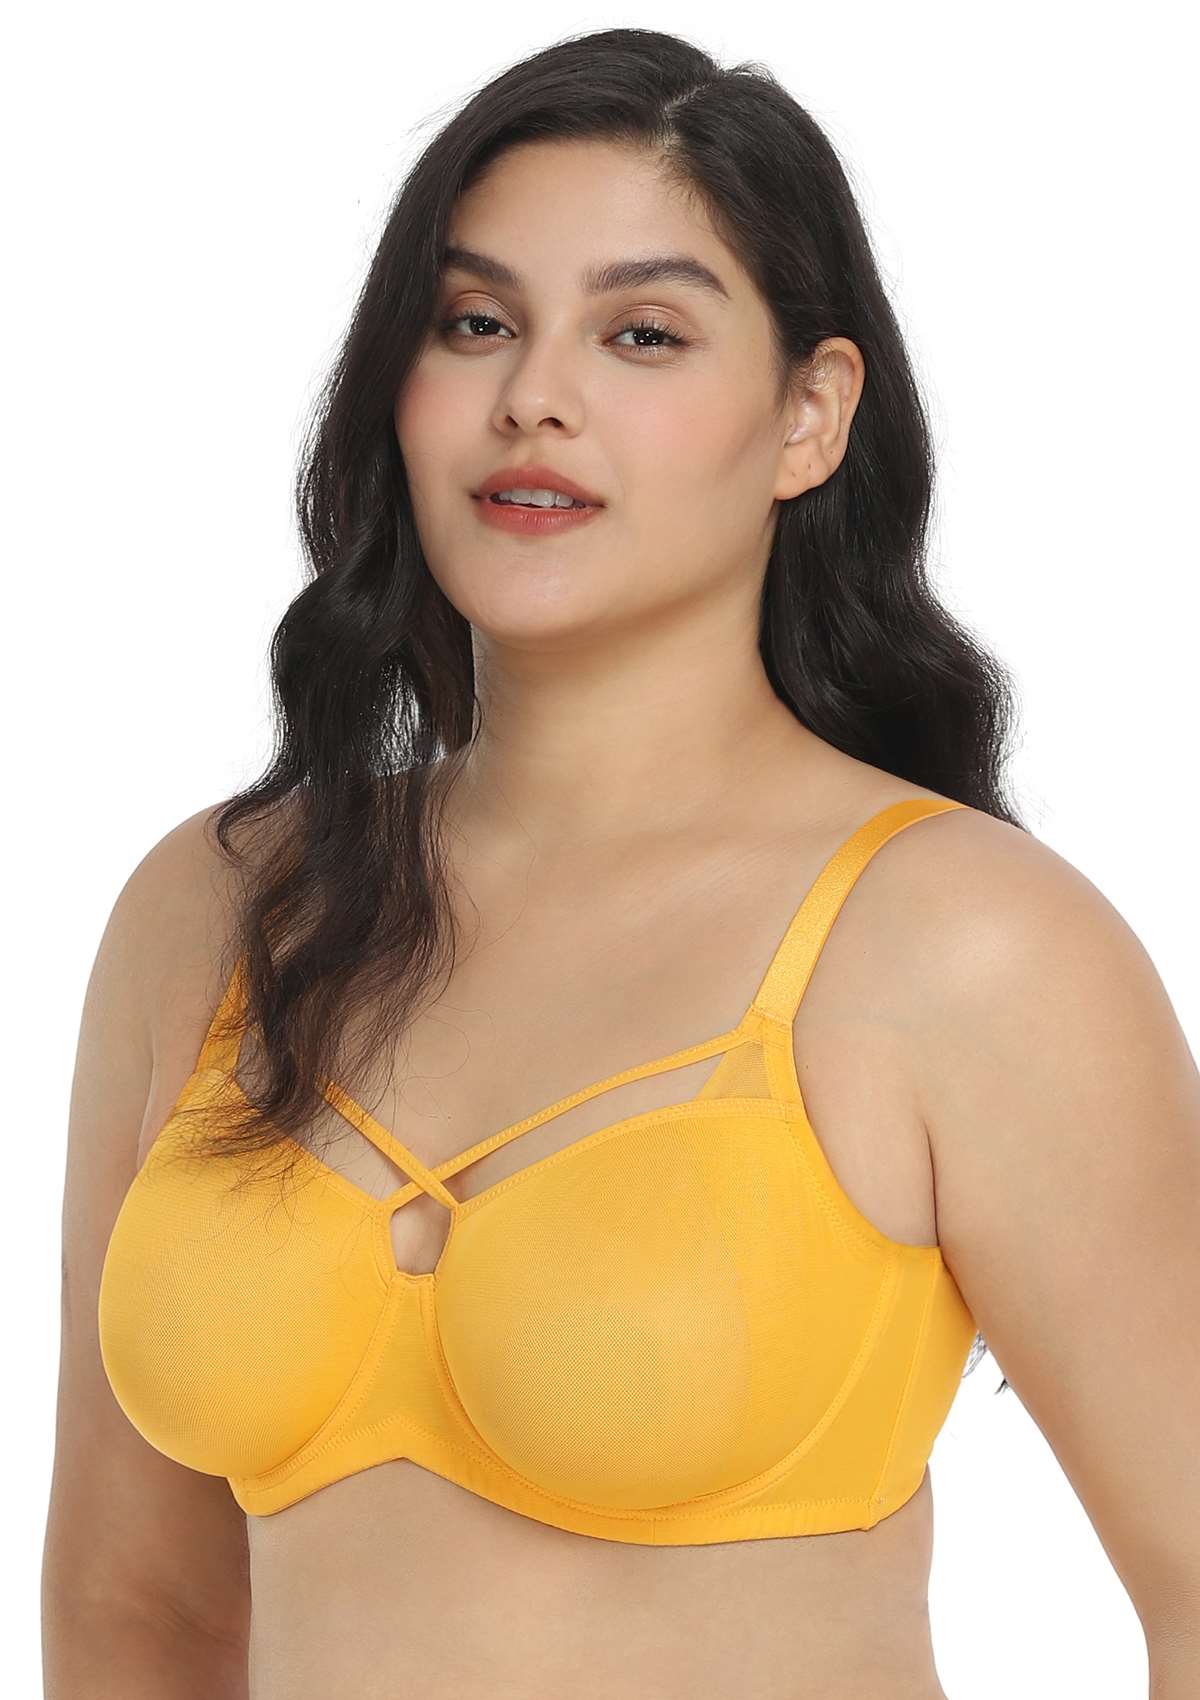 HSIA Billie Cross Front Strap Smooth Sheer Mesh Comfy Underwire Bra - Yellow / 42 / C